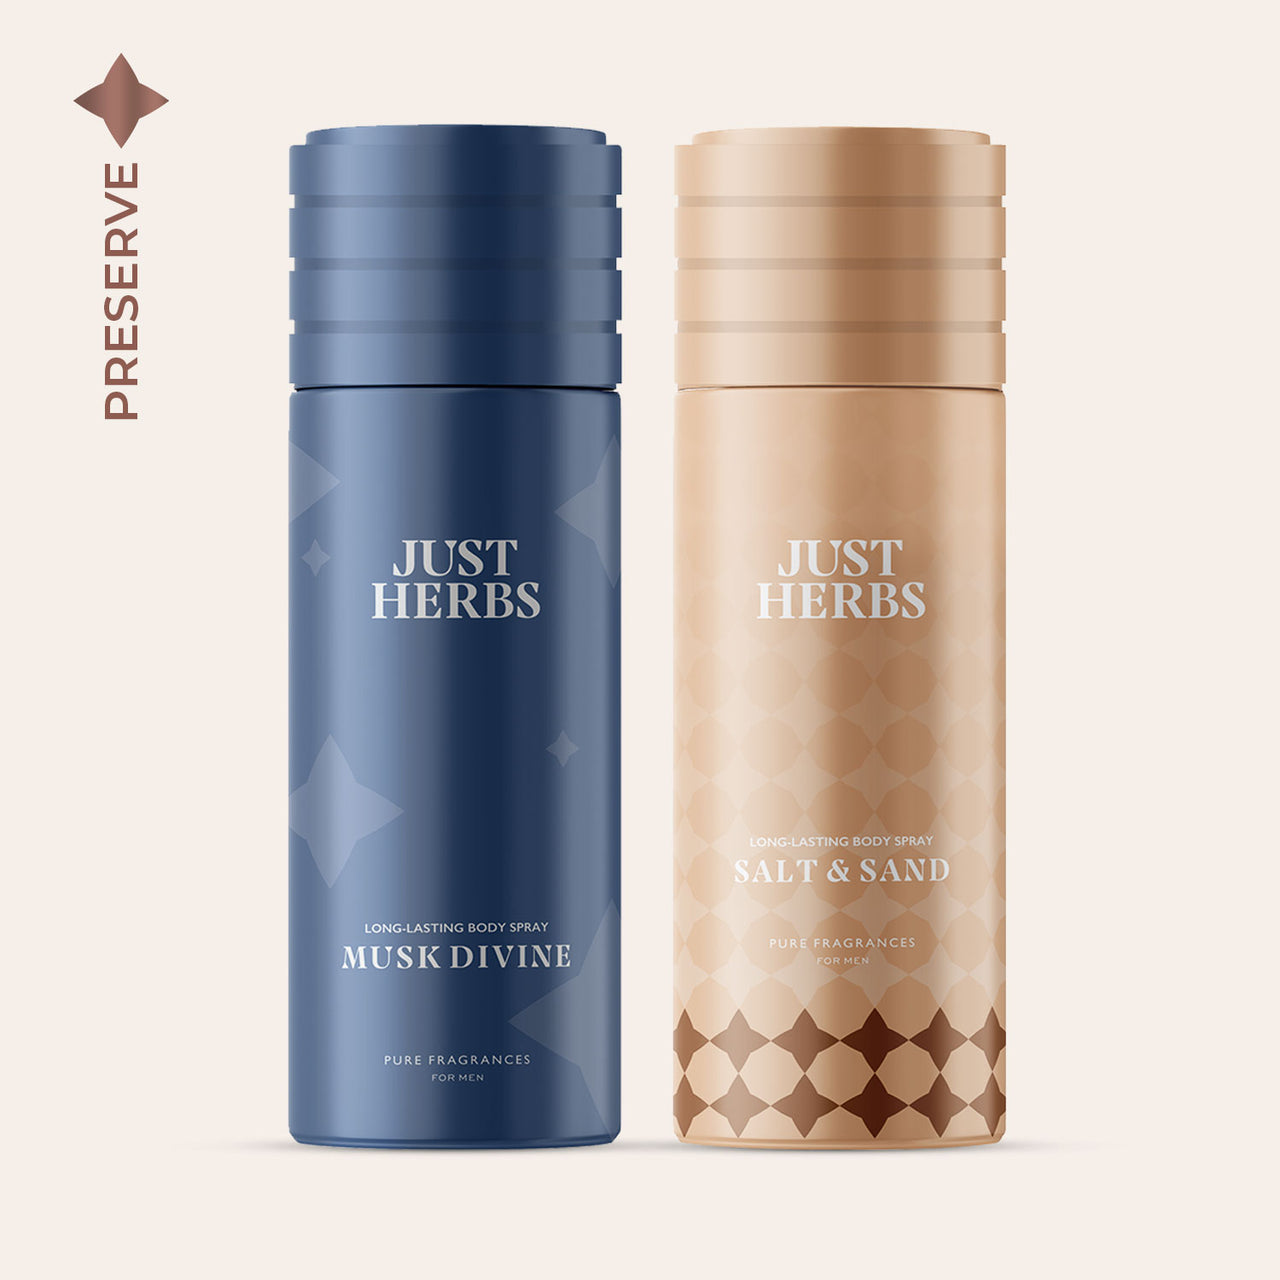 Rituals Deodorants (12 products) find prices here »